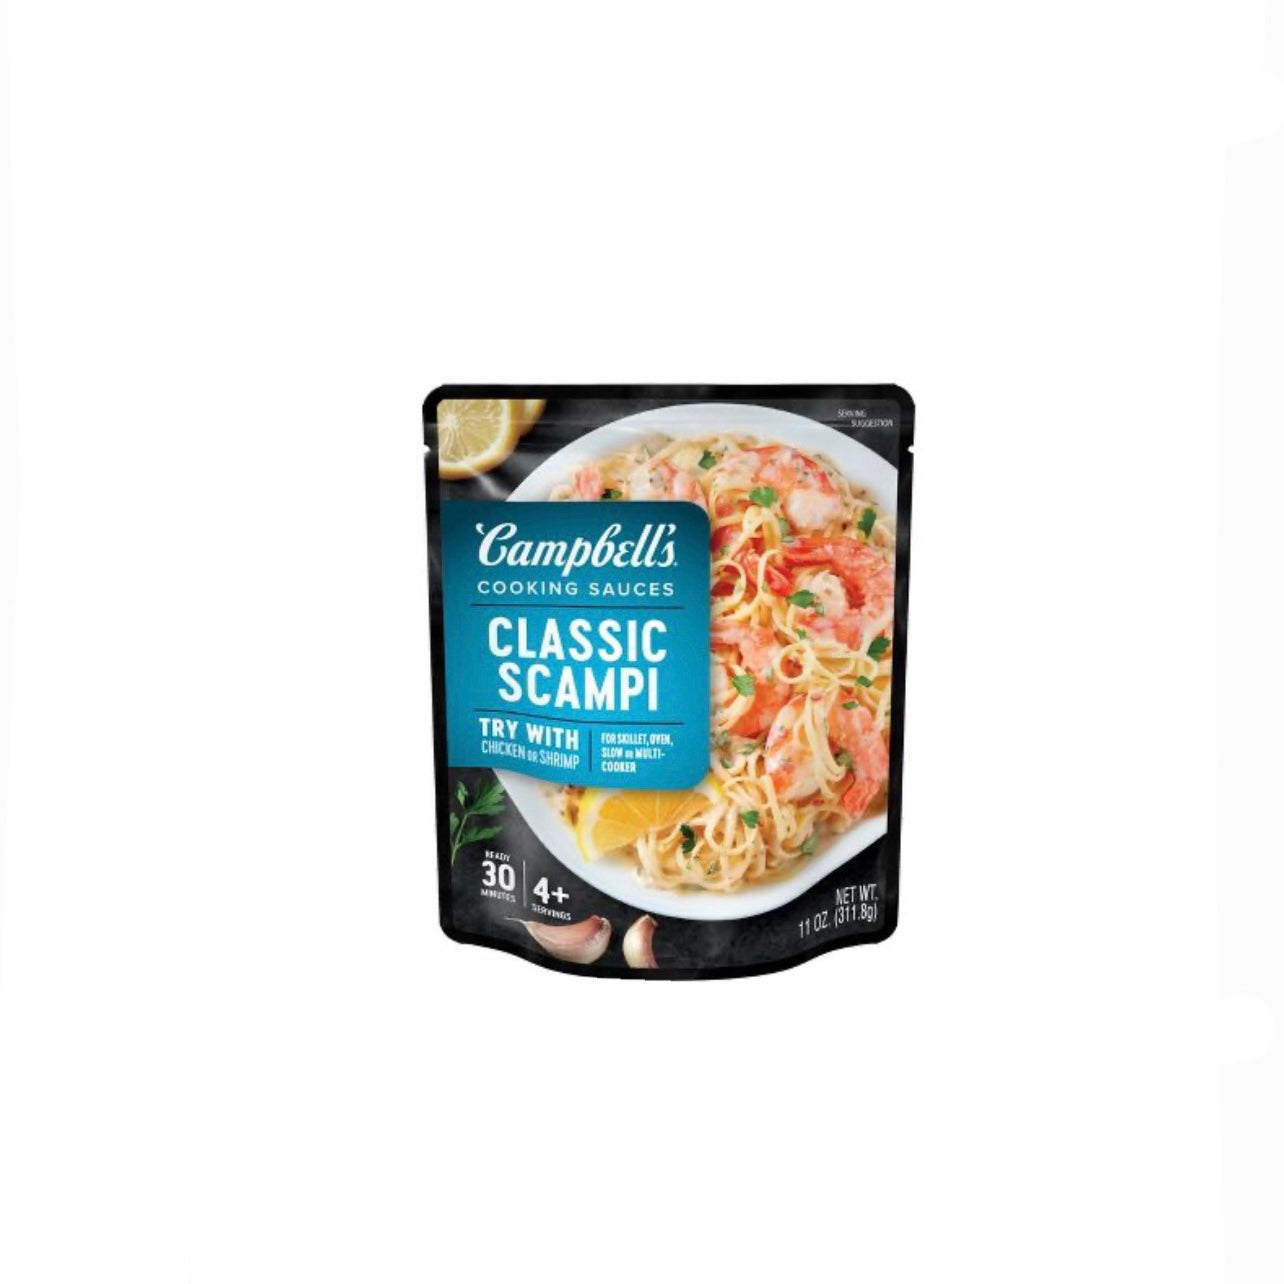 Campbell's Sauces Skillet Classic Scampi (14770384)